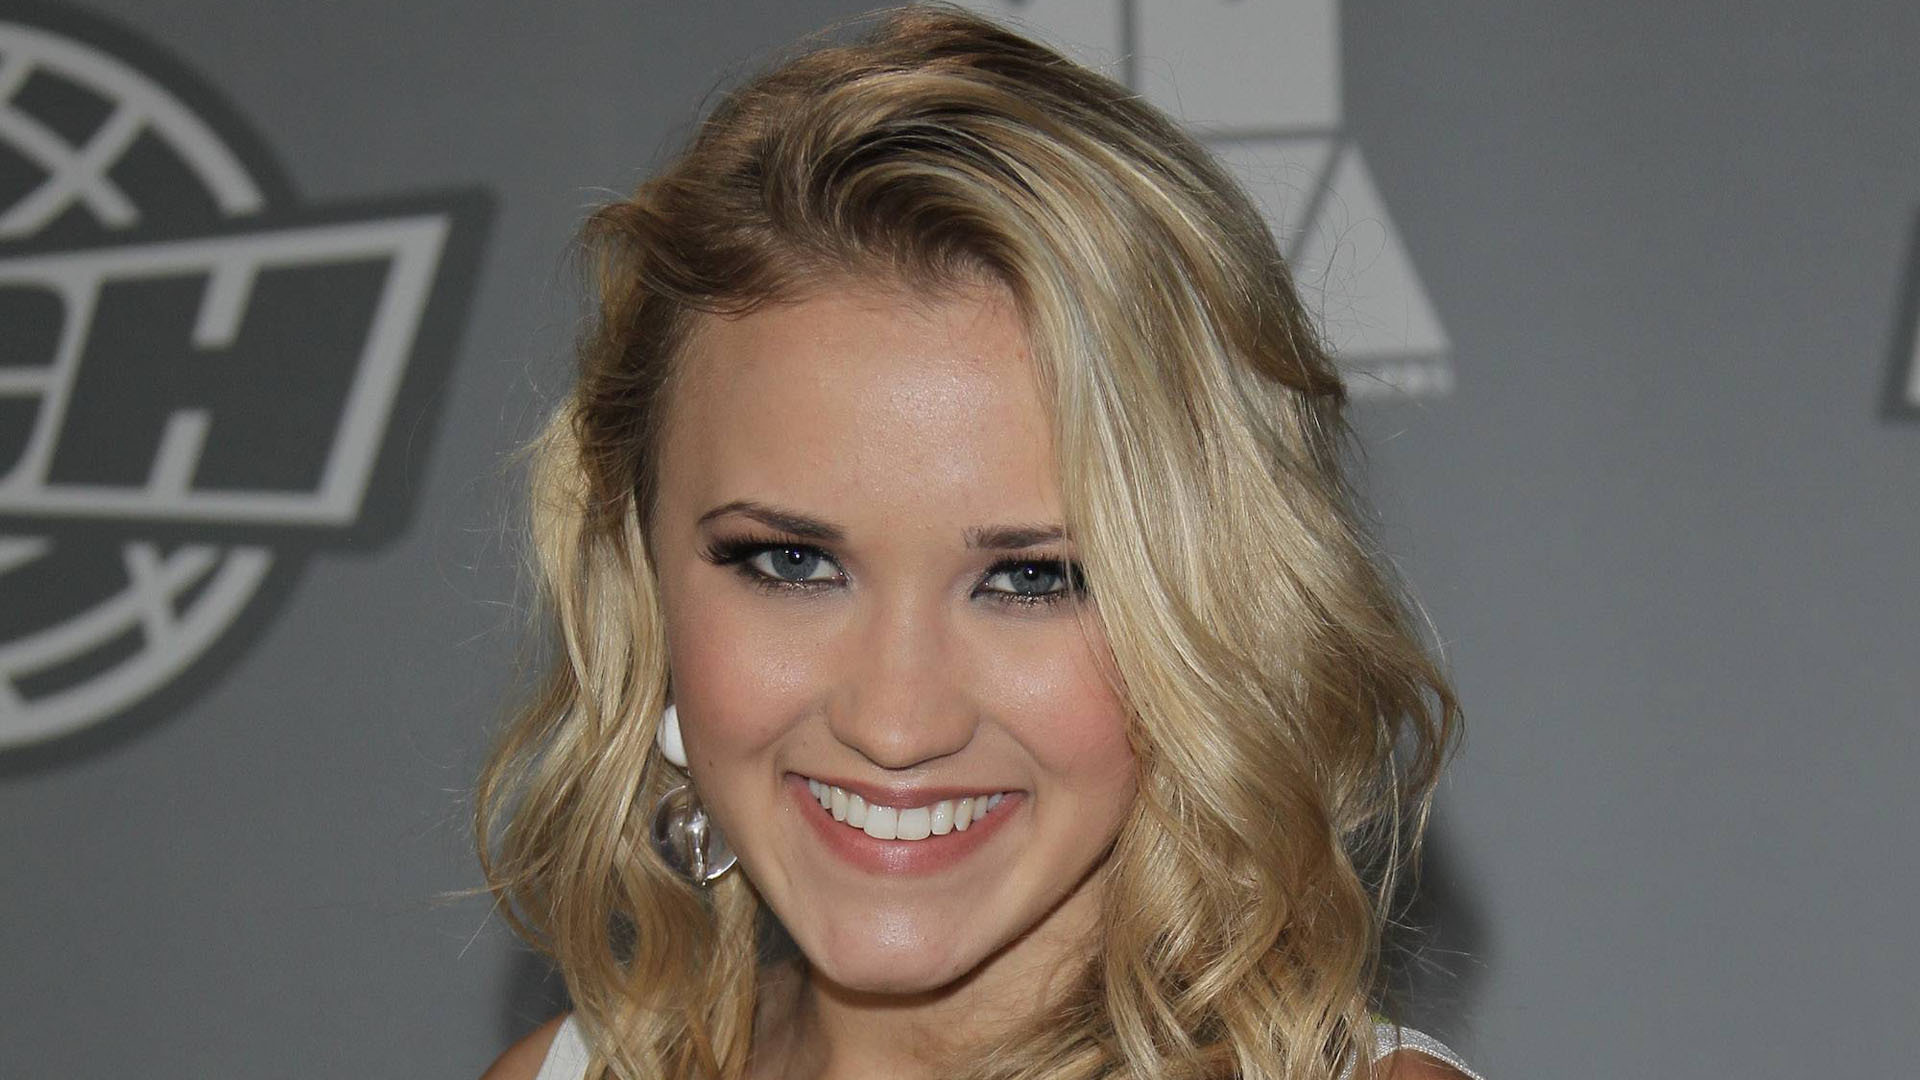 Emily Osment Wallpaper Image Photos Pictures Background